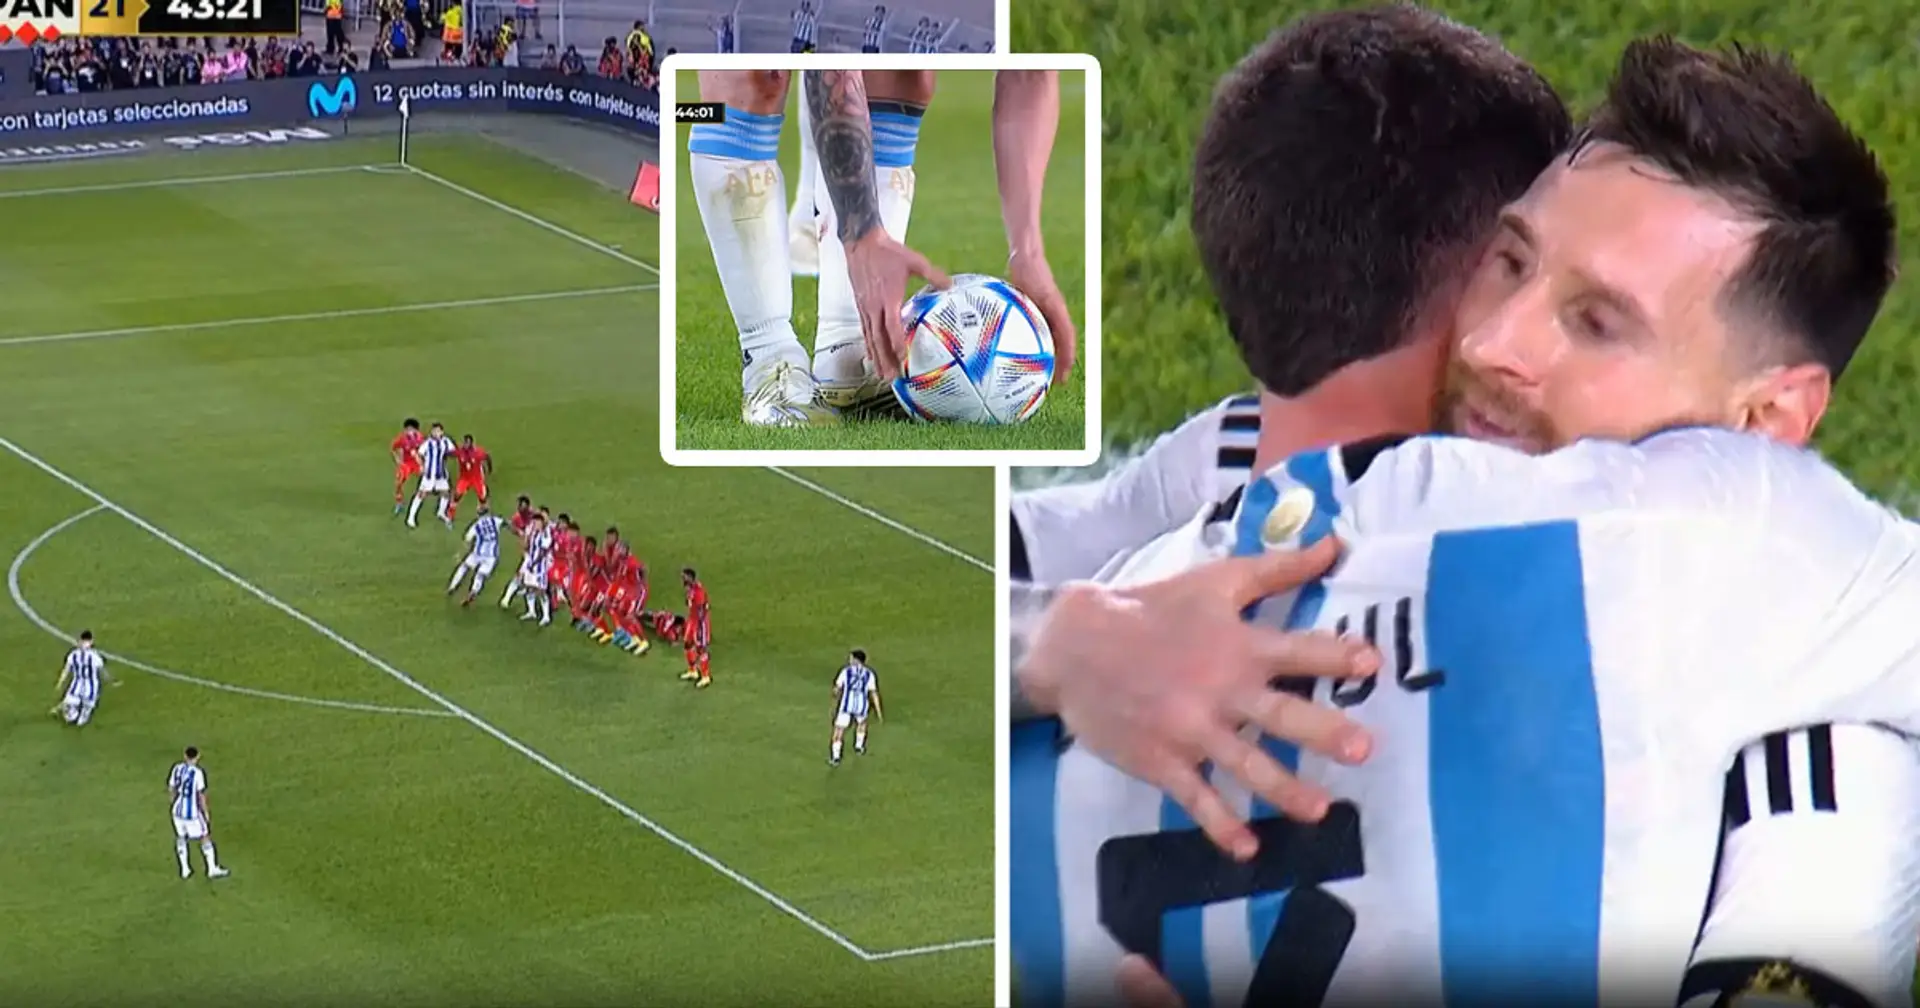 Messi scores 800th career goal with stunning free-kick for Argentina (video)